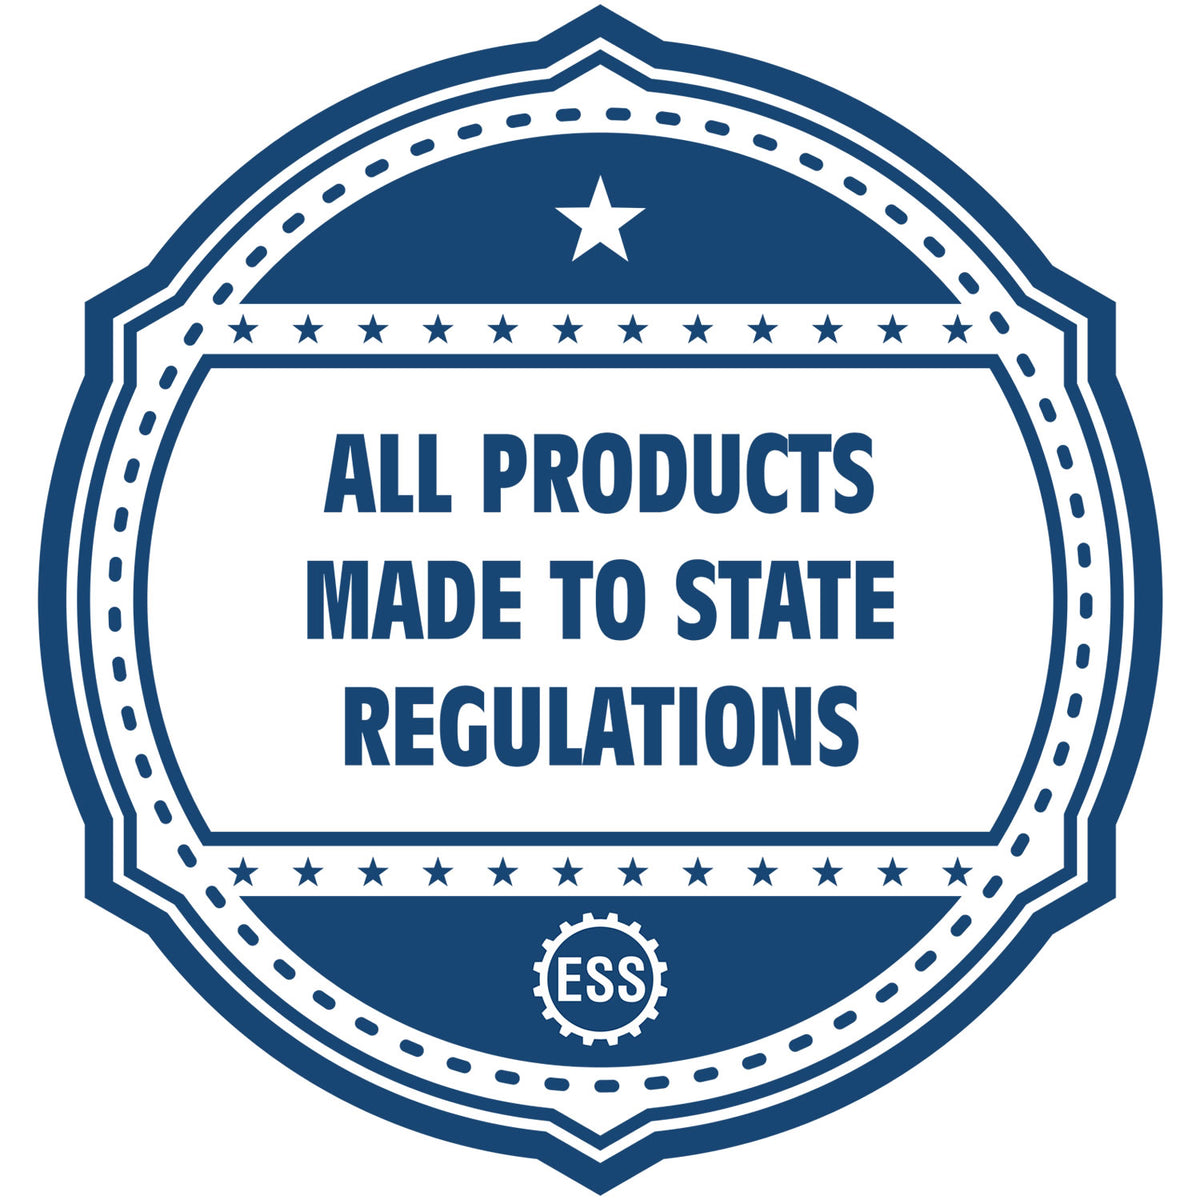 An icon or badge element for the PSI South Carolina Notary Stamp showing that this product is made in compliance with state regulations.